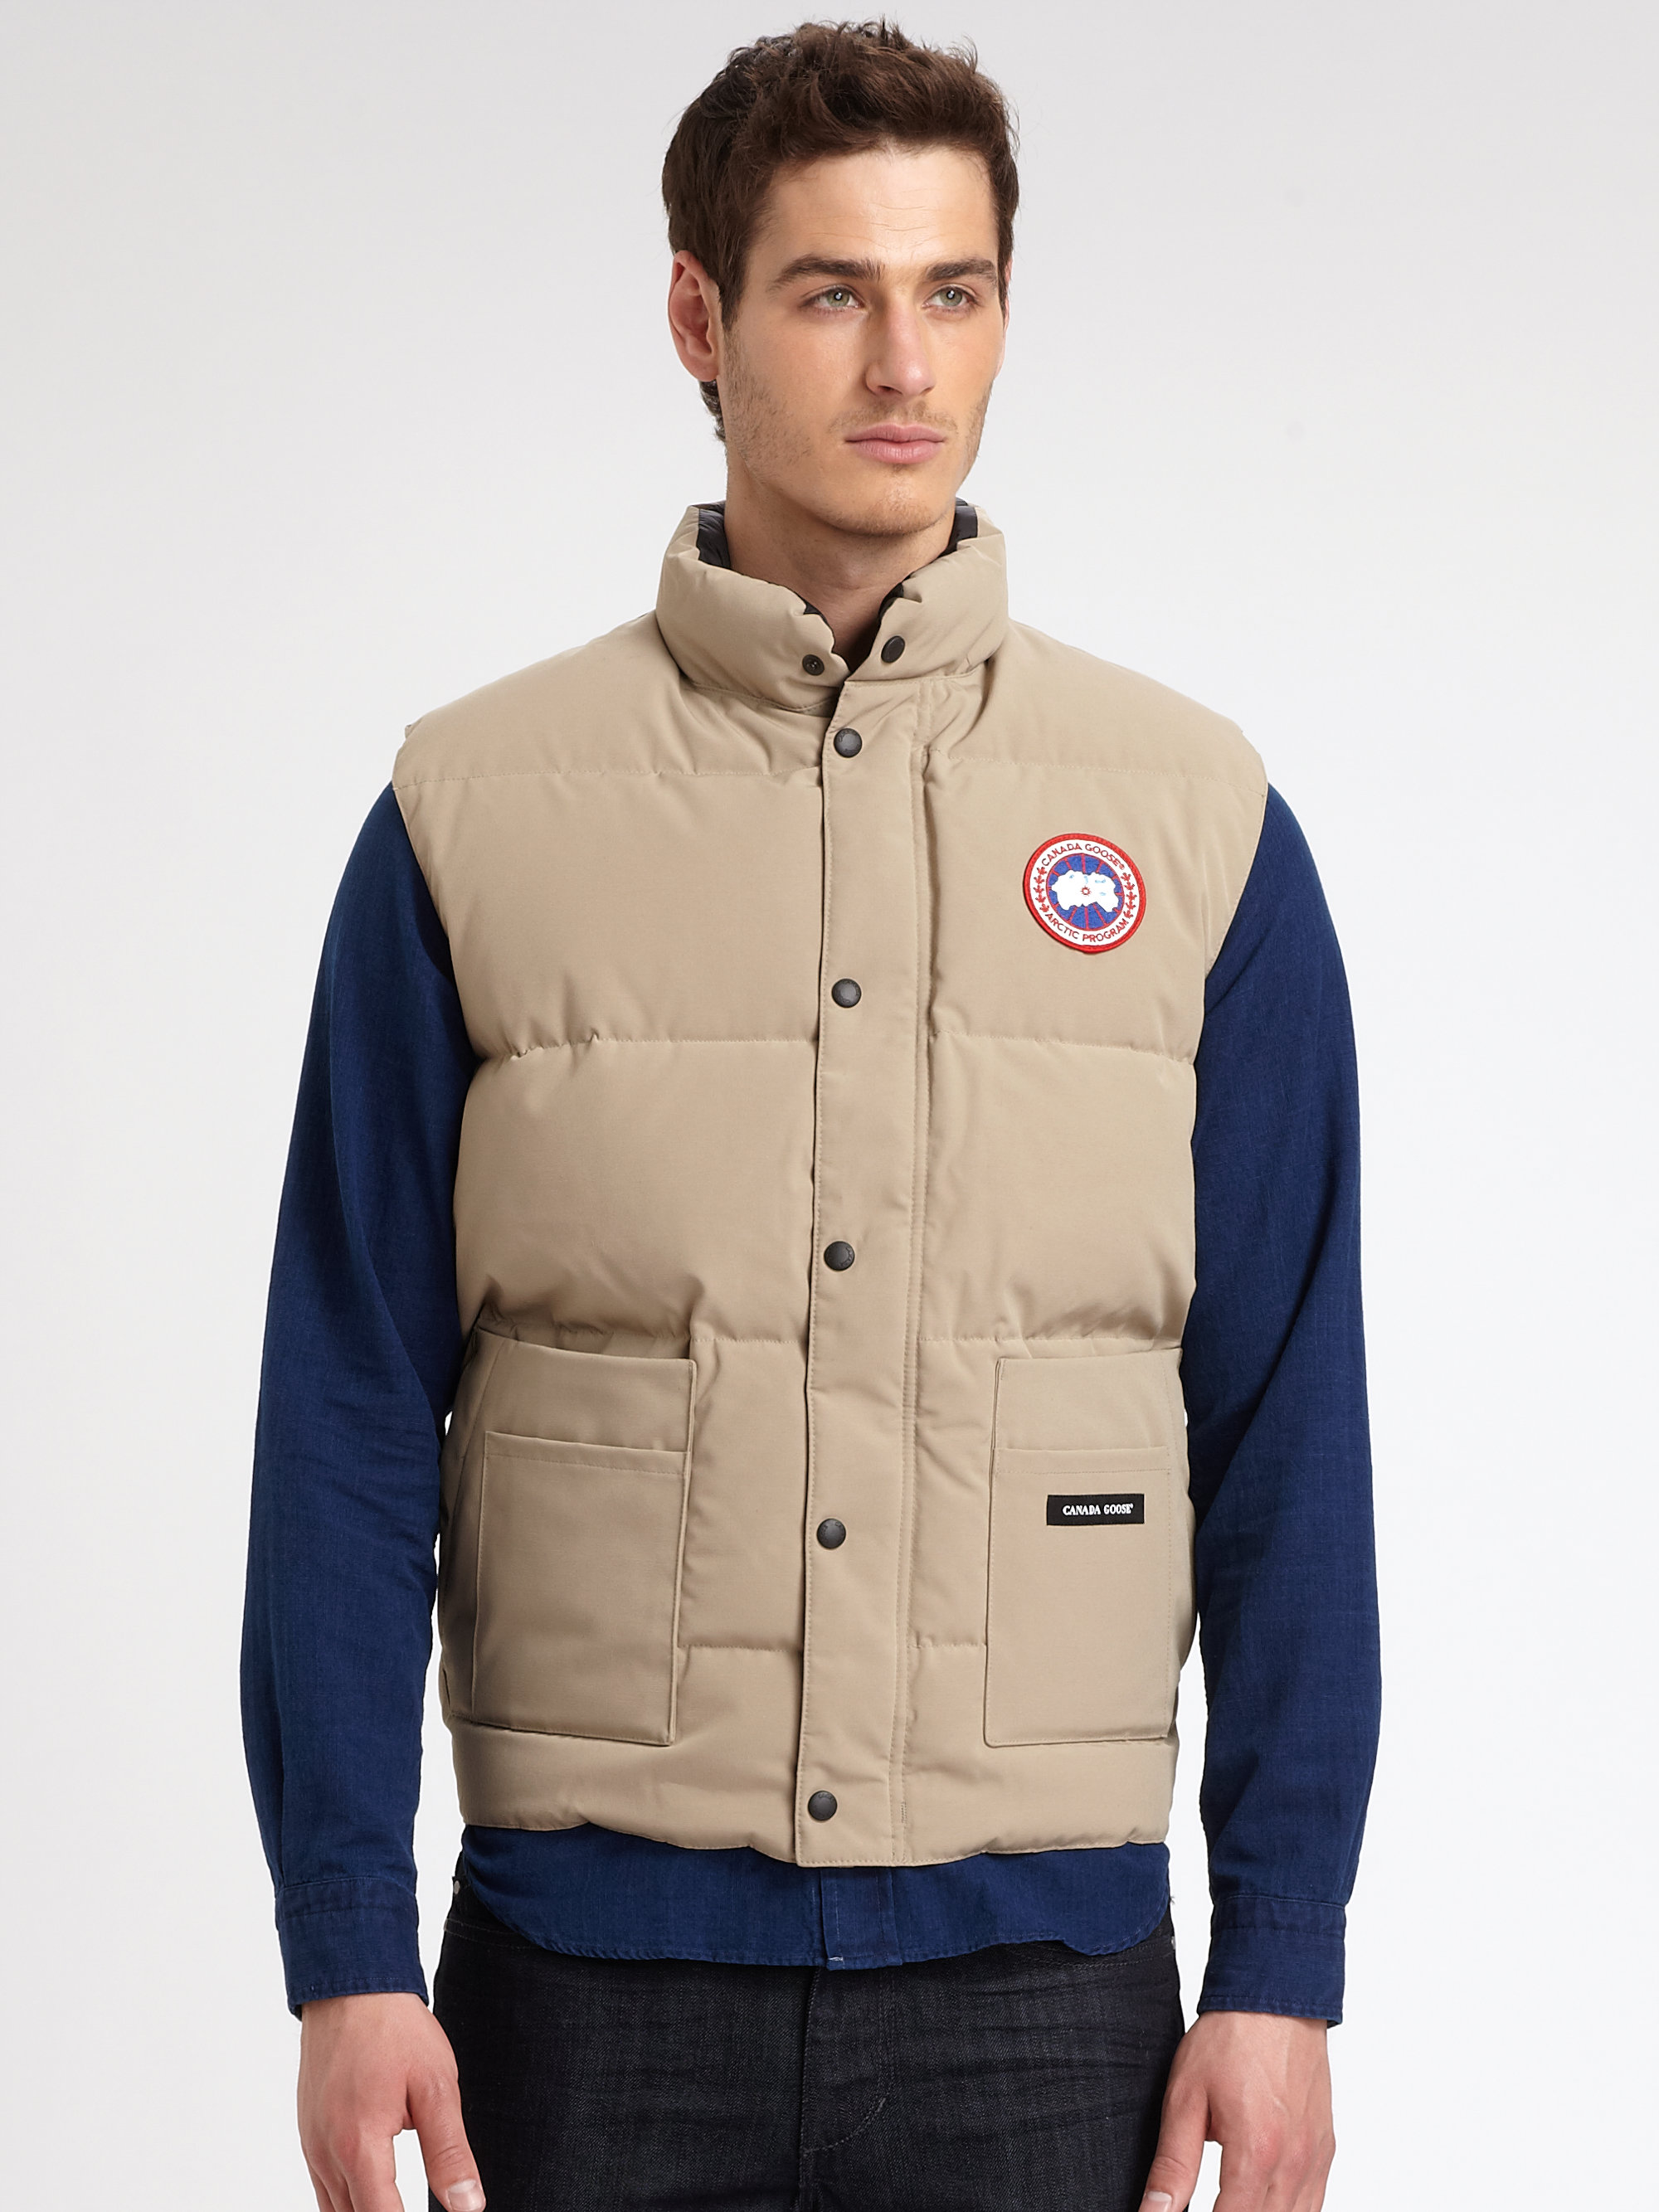 Canada Goose Freestyle Vest in Tan (Natural) for Men - Lyst